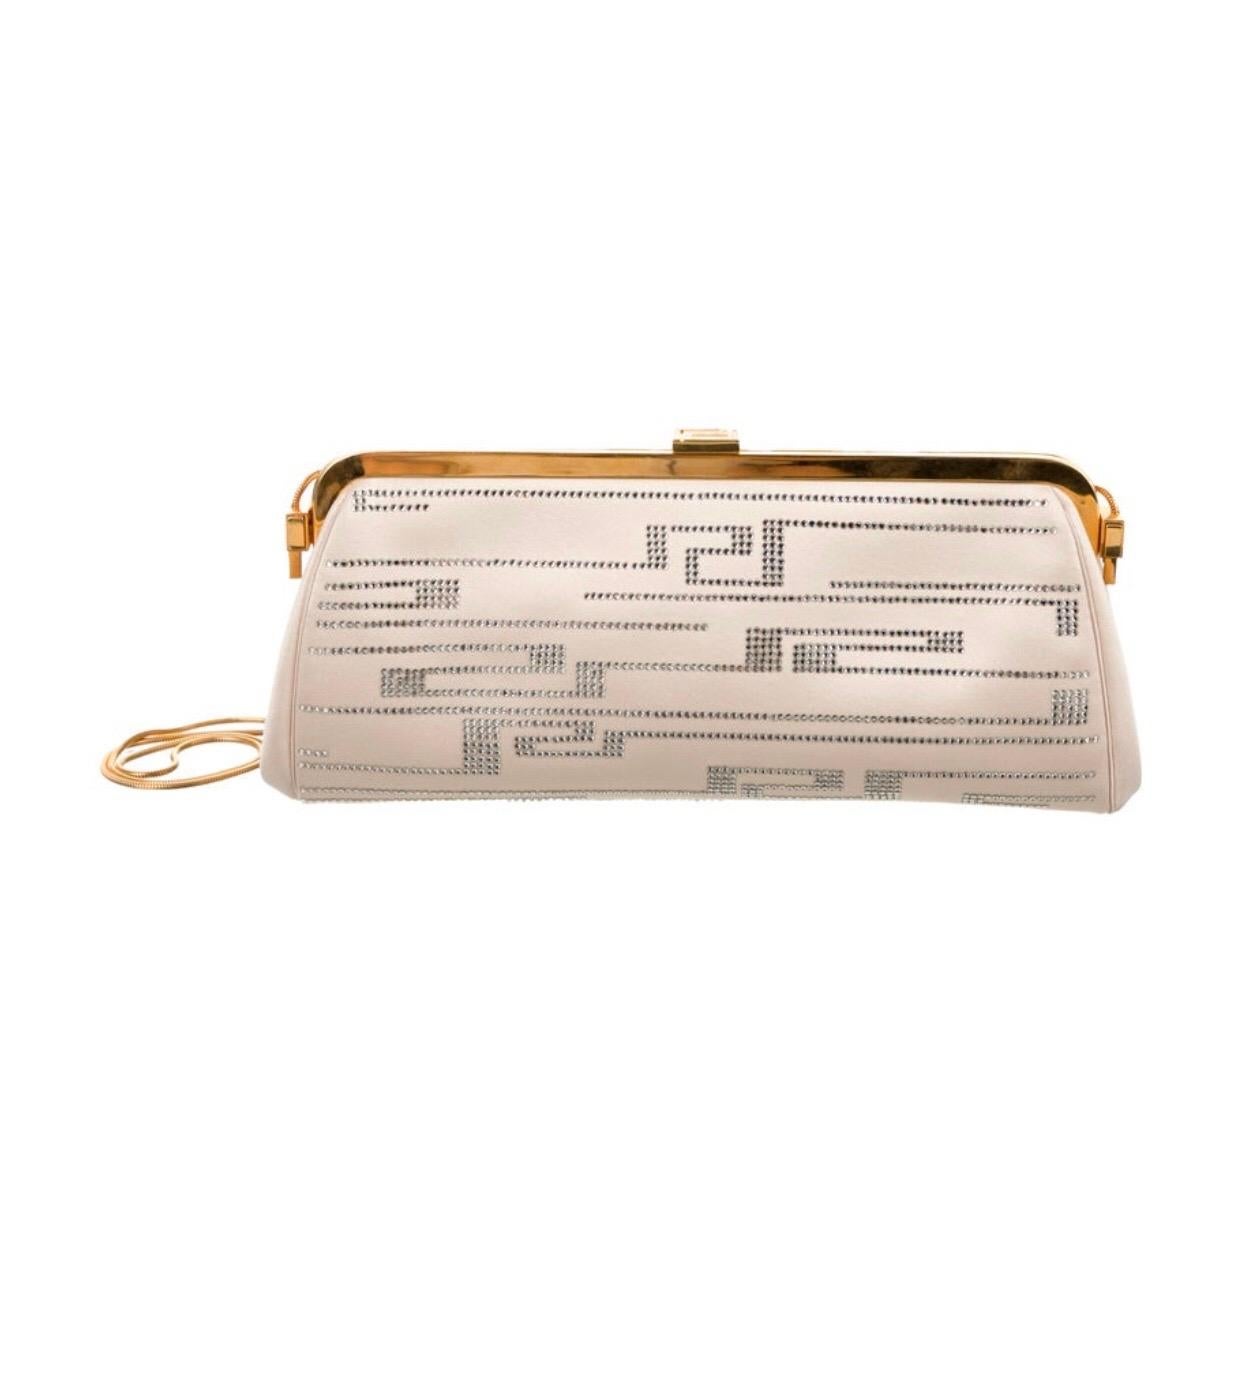 Gianni Versace ivory satin evening bag with chain strap. Condition :Excellent. 
10.25